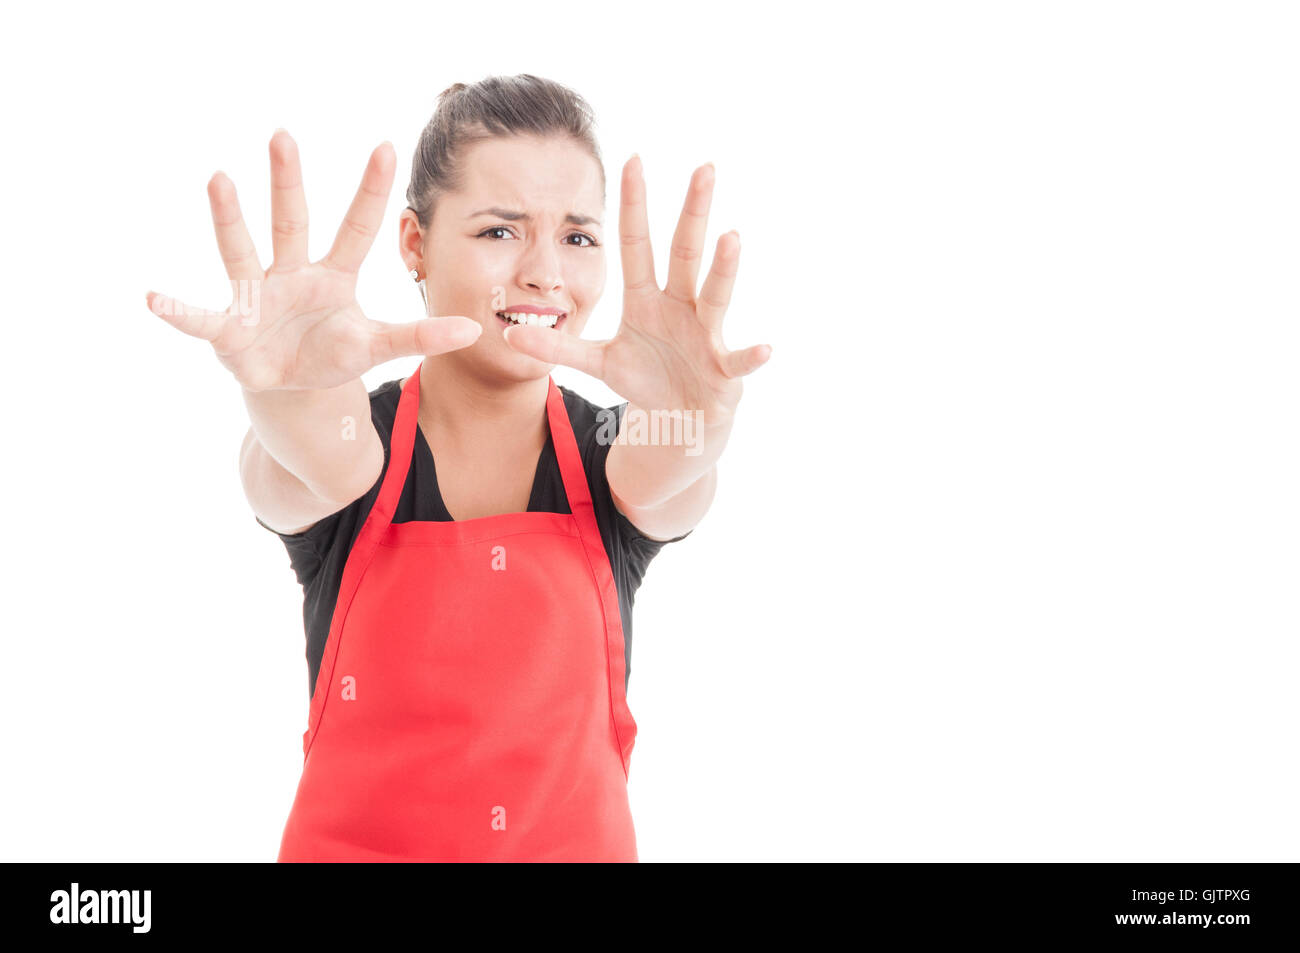 Young market seller looking stressed and asking for help on white background with text area Stock Photo